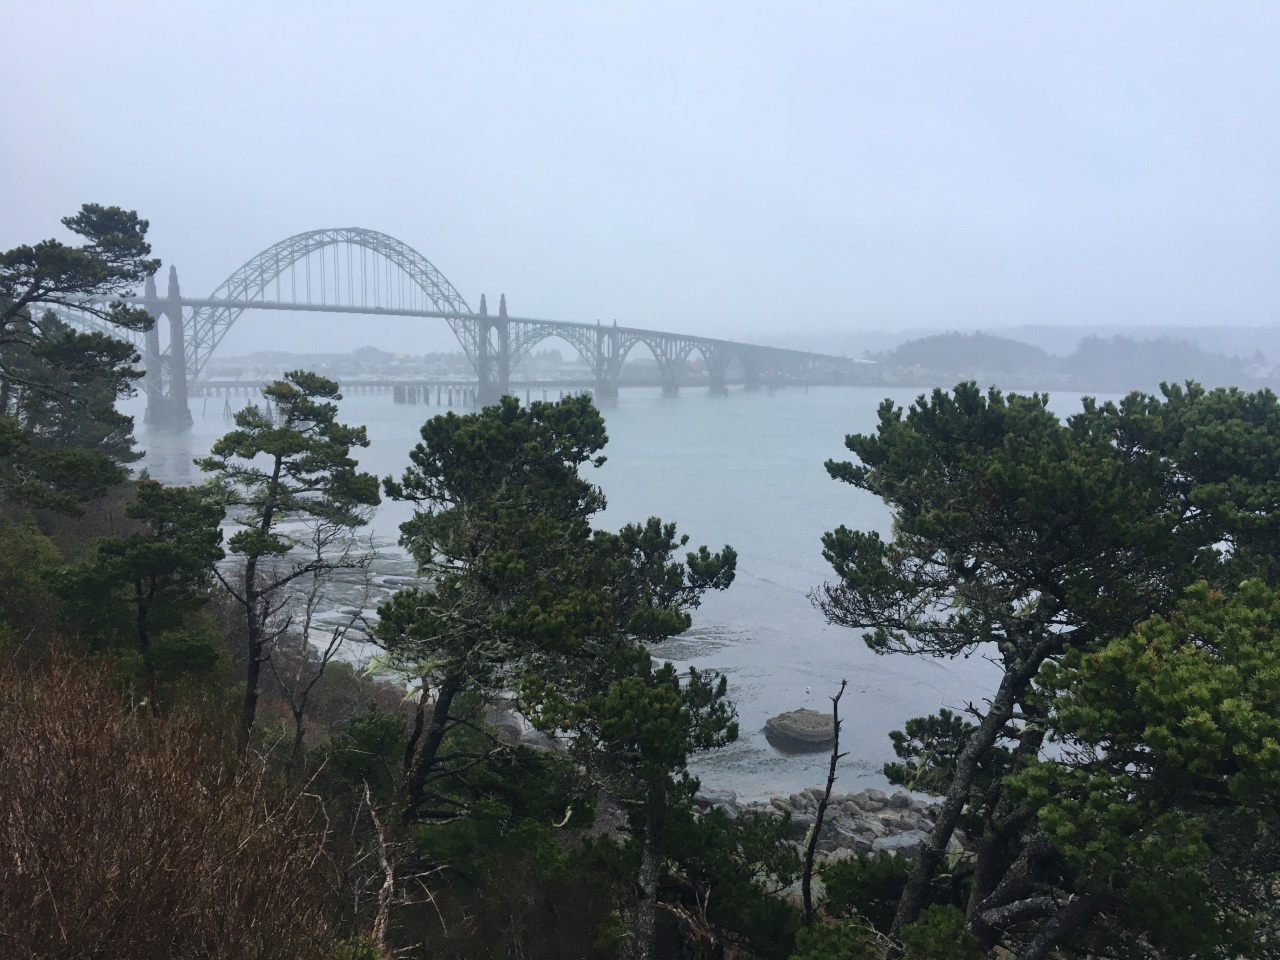 Looking across at the bridge from Yaquina Bay State Recreation Site